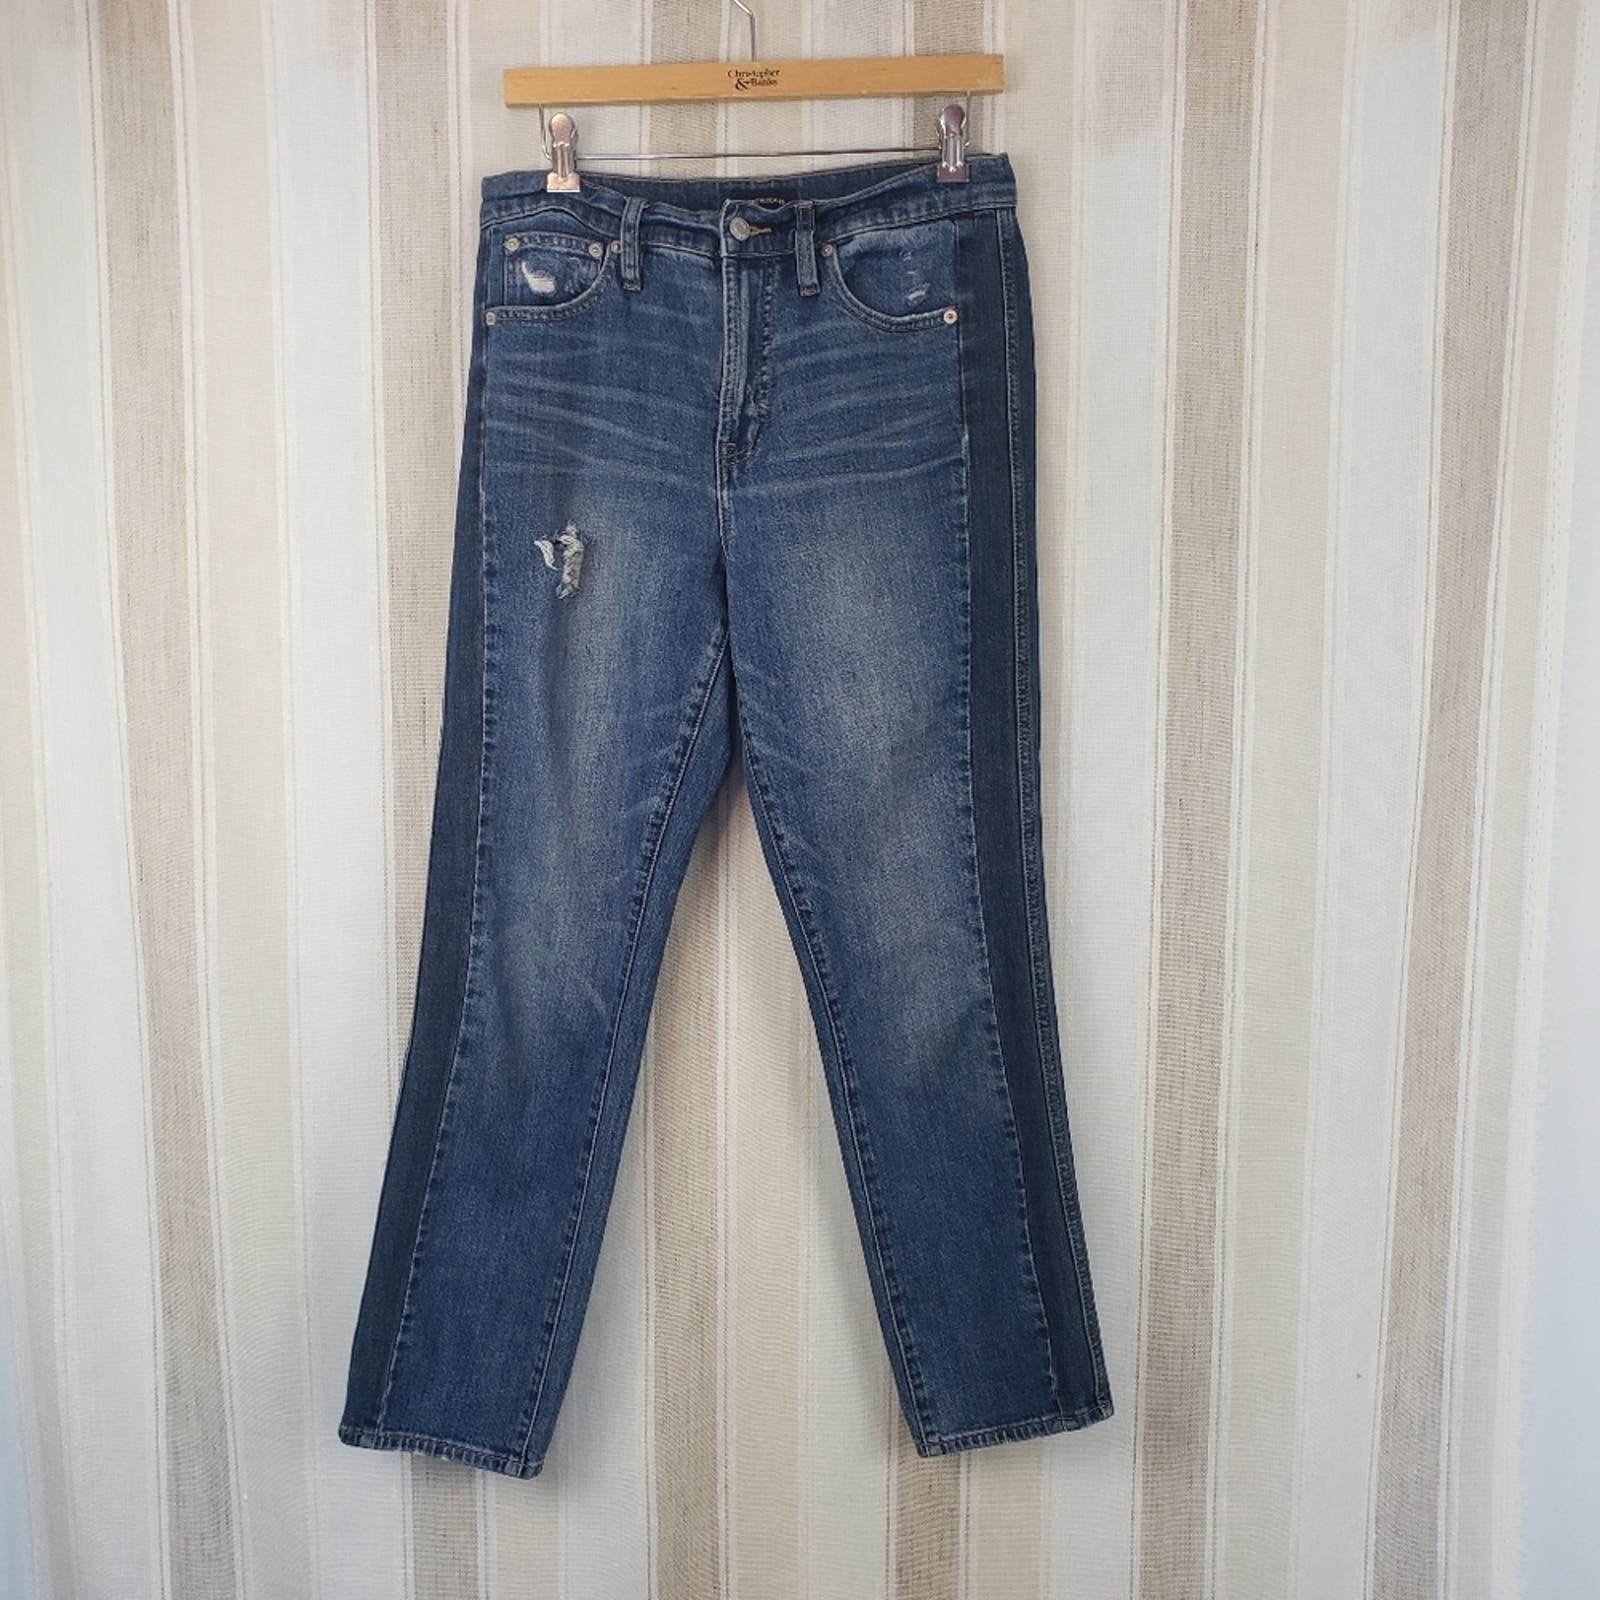 High quality J. Crew Vintage Straight Jeans Blue Size 2